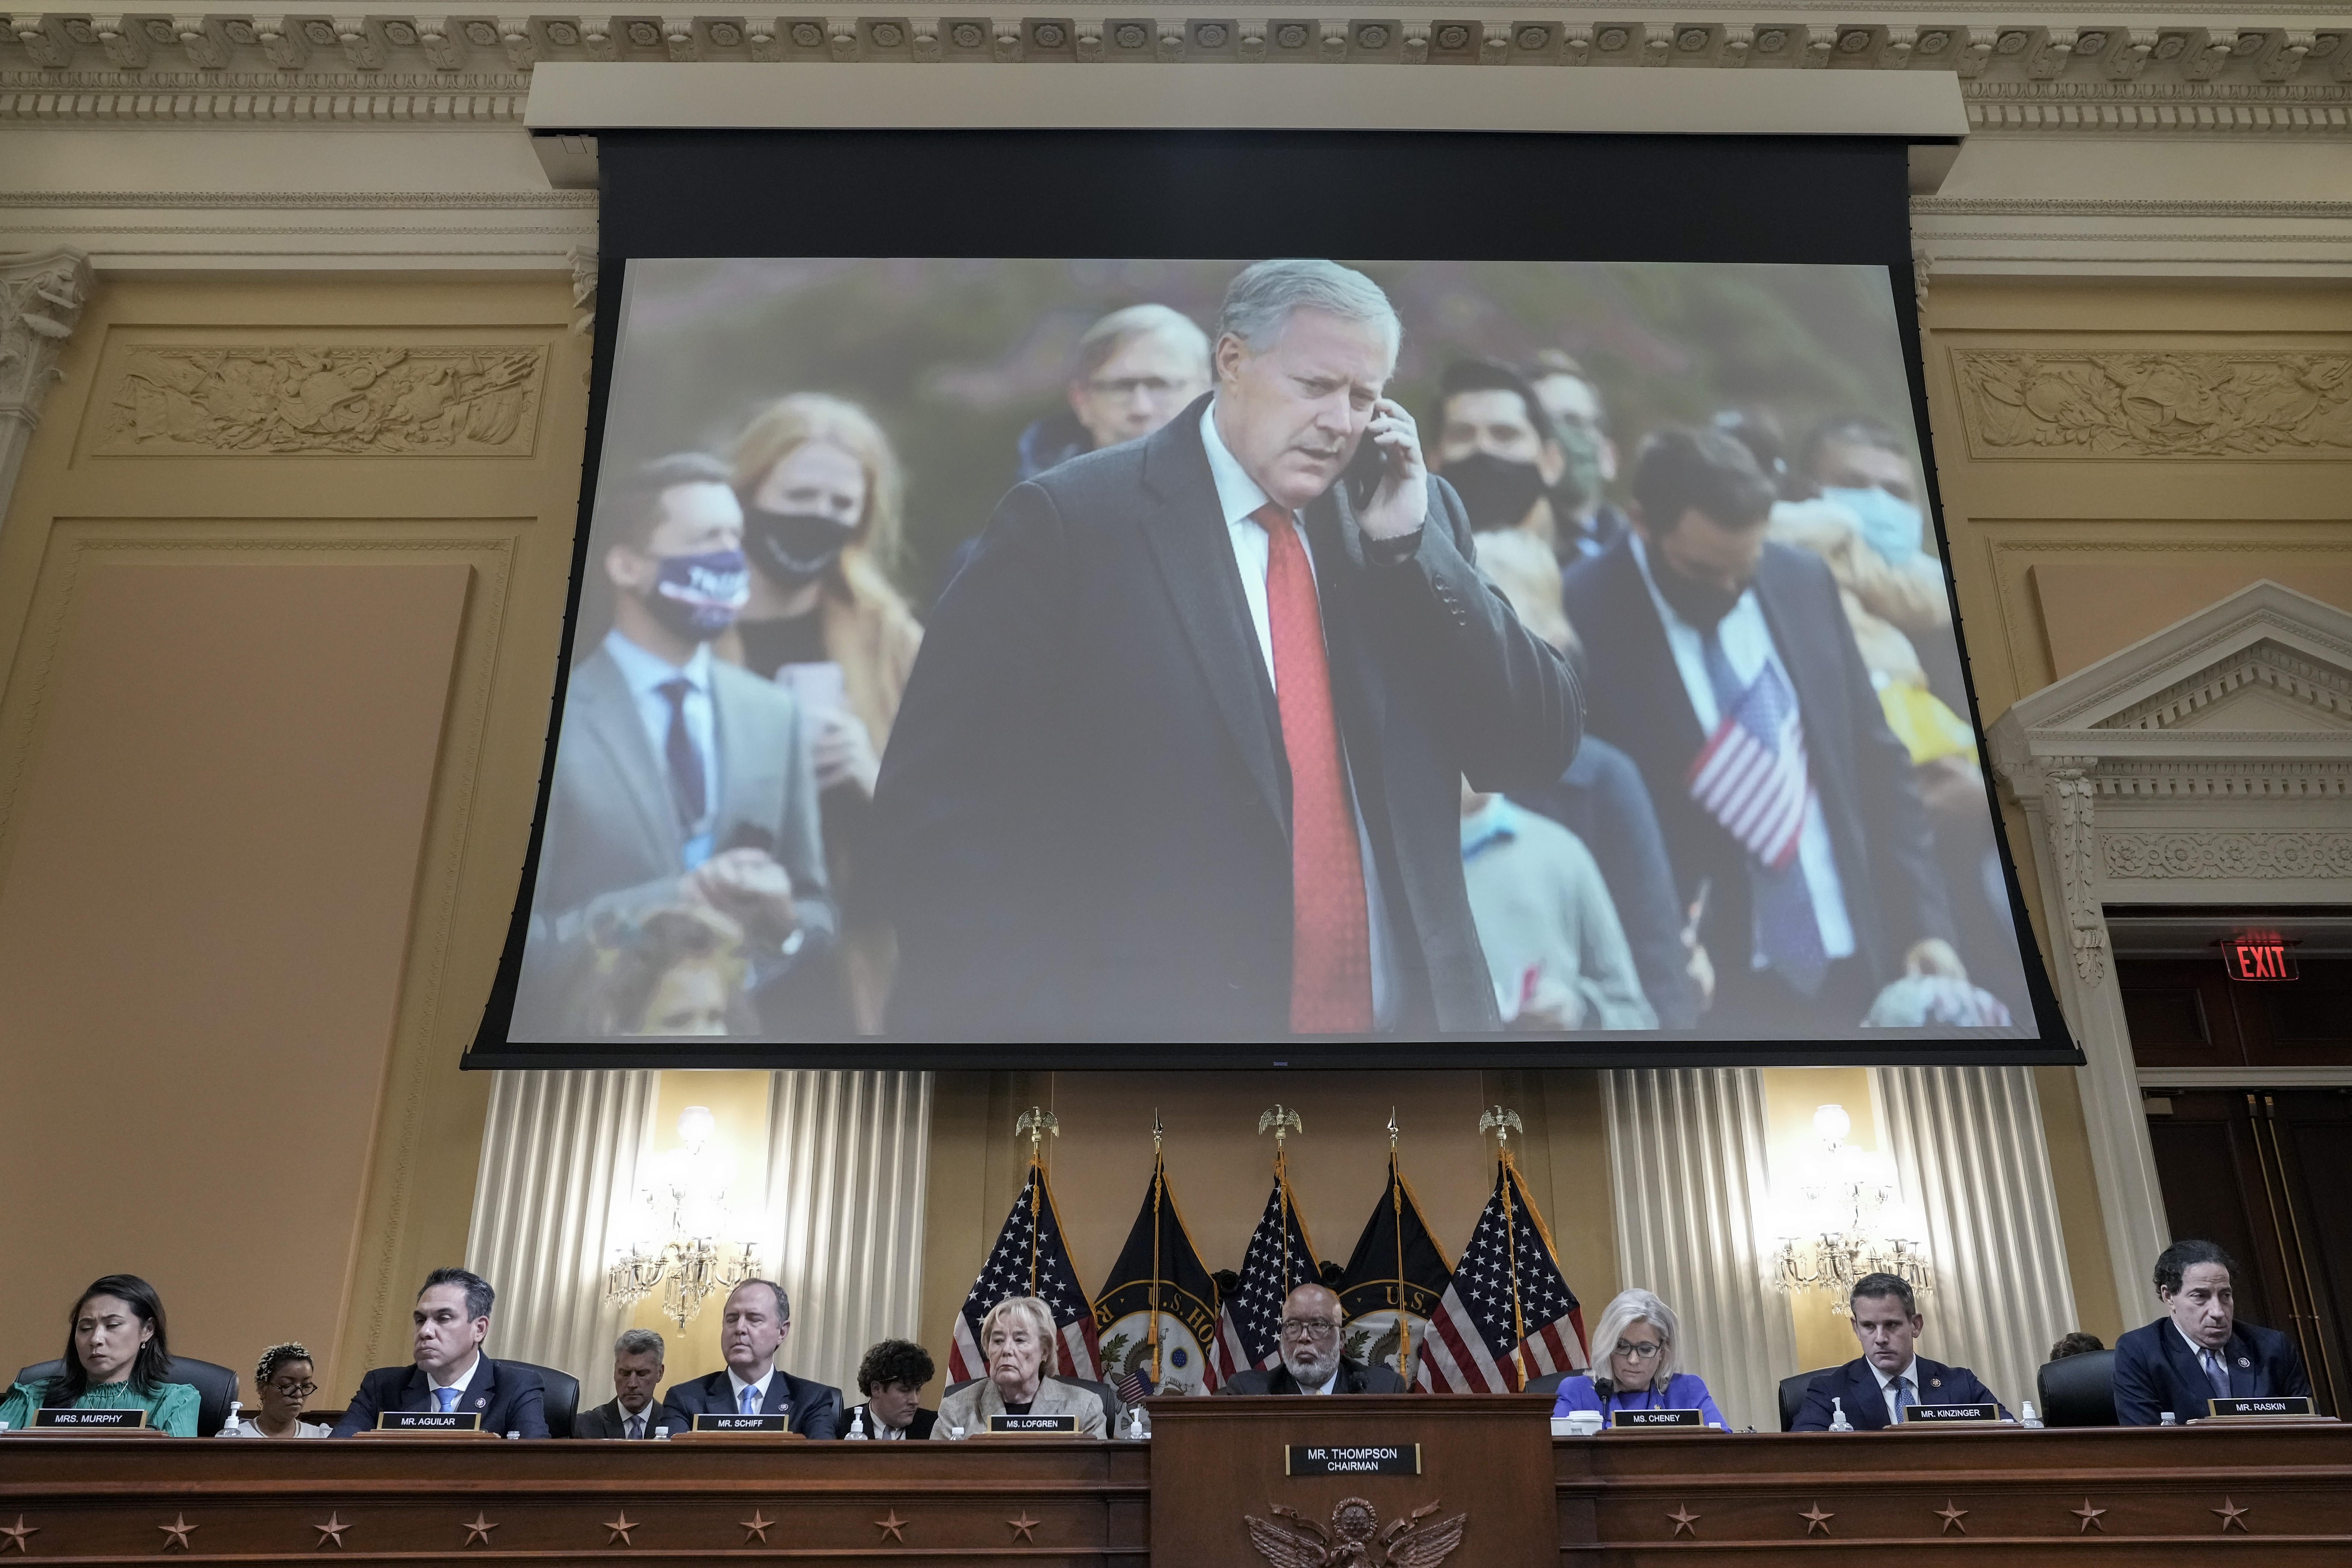 Mark Meadows displayed on a screen above the dais where members of the select committee sit.